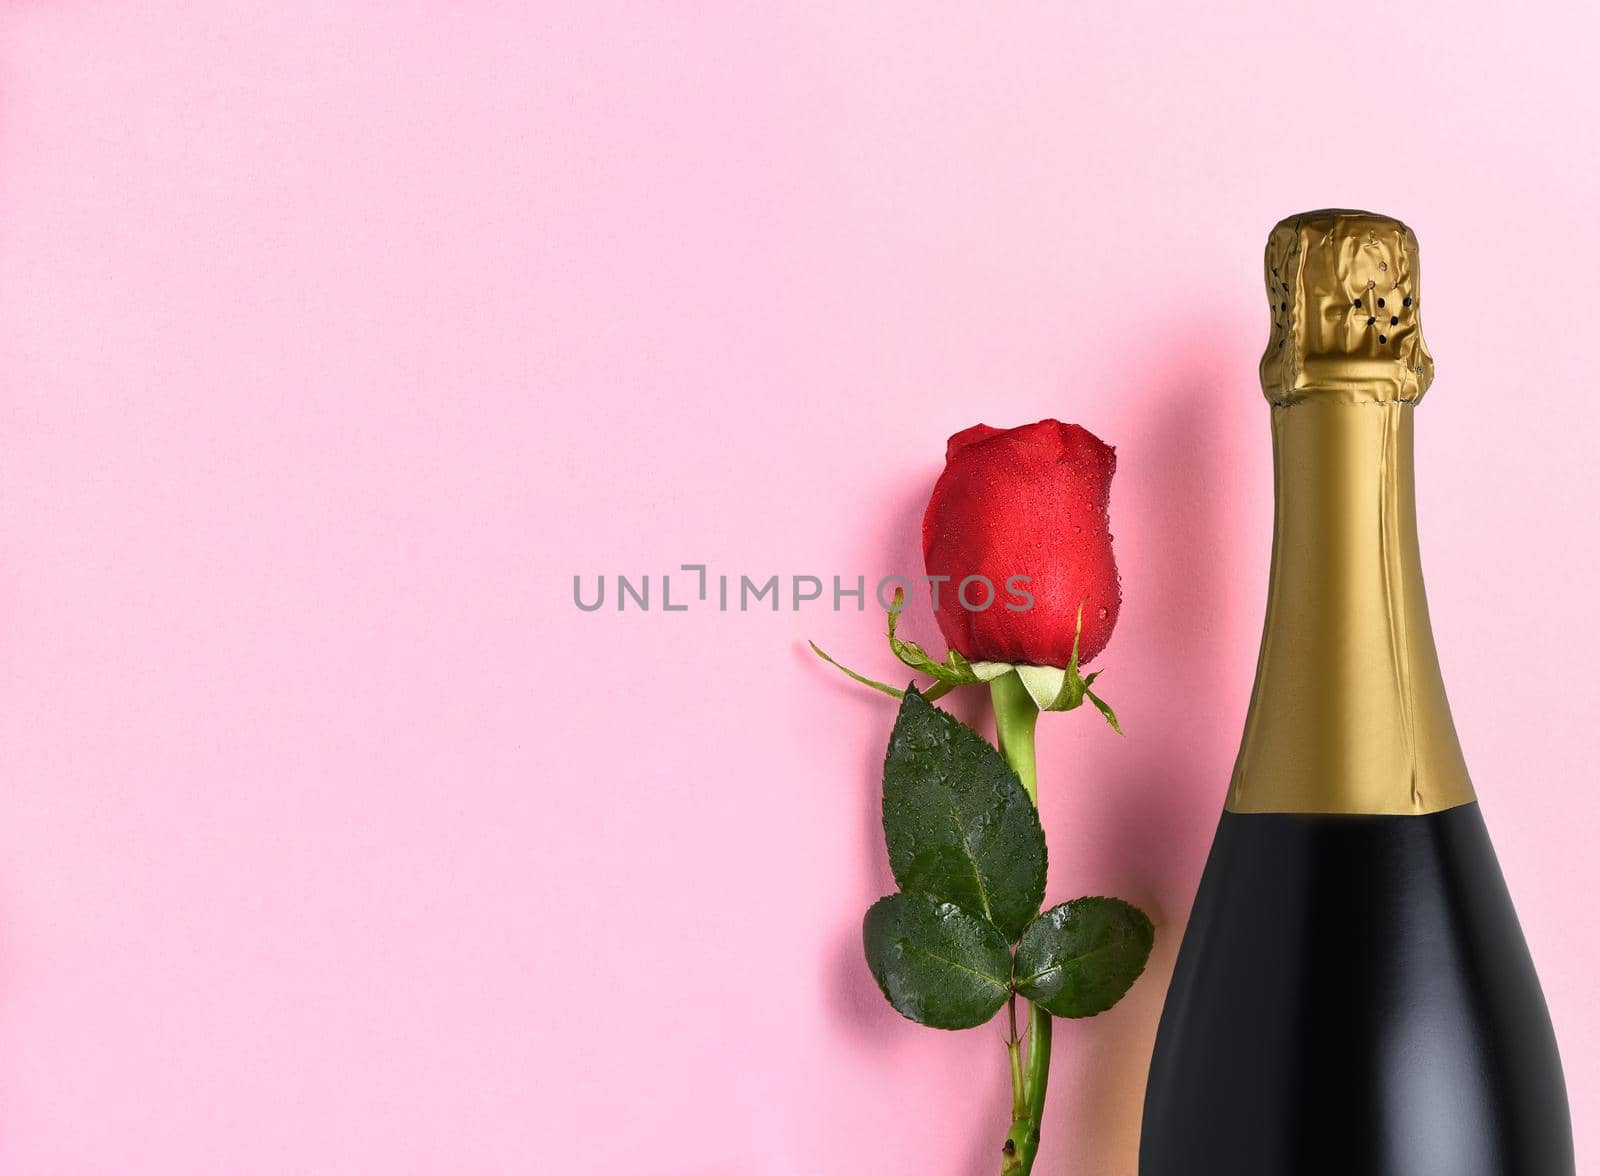 Single Rose and Champagne Bottle on Pink Background by sCukrov